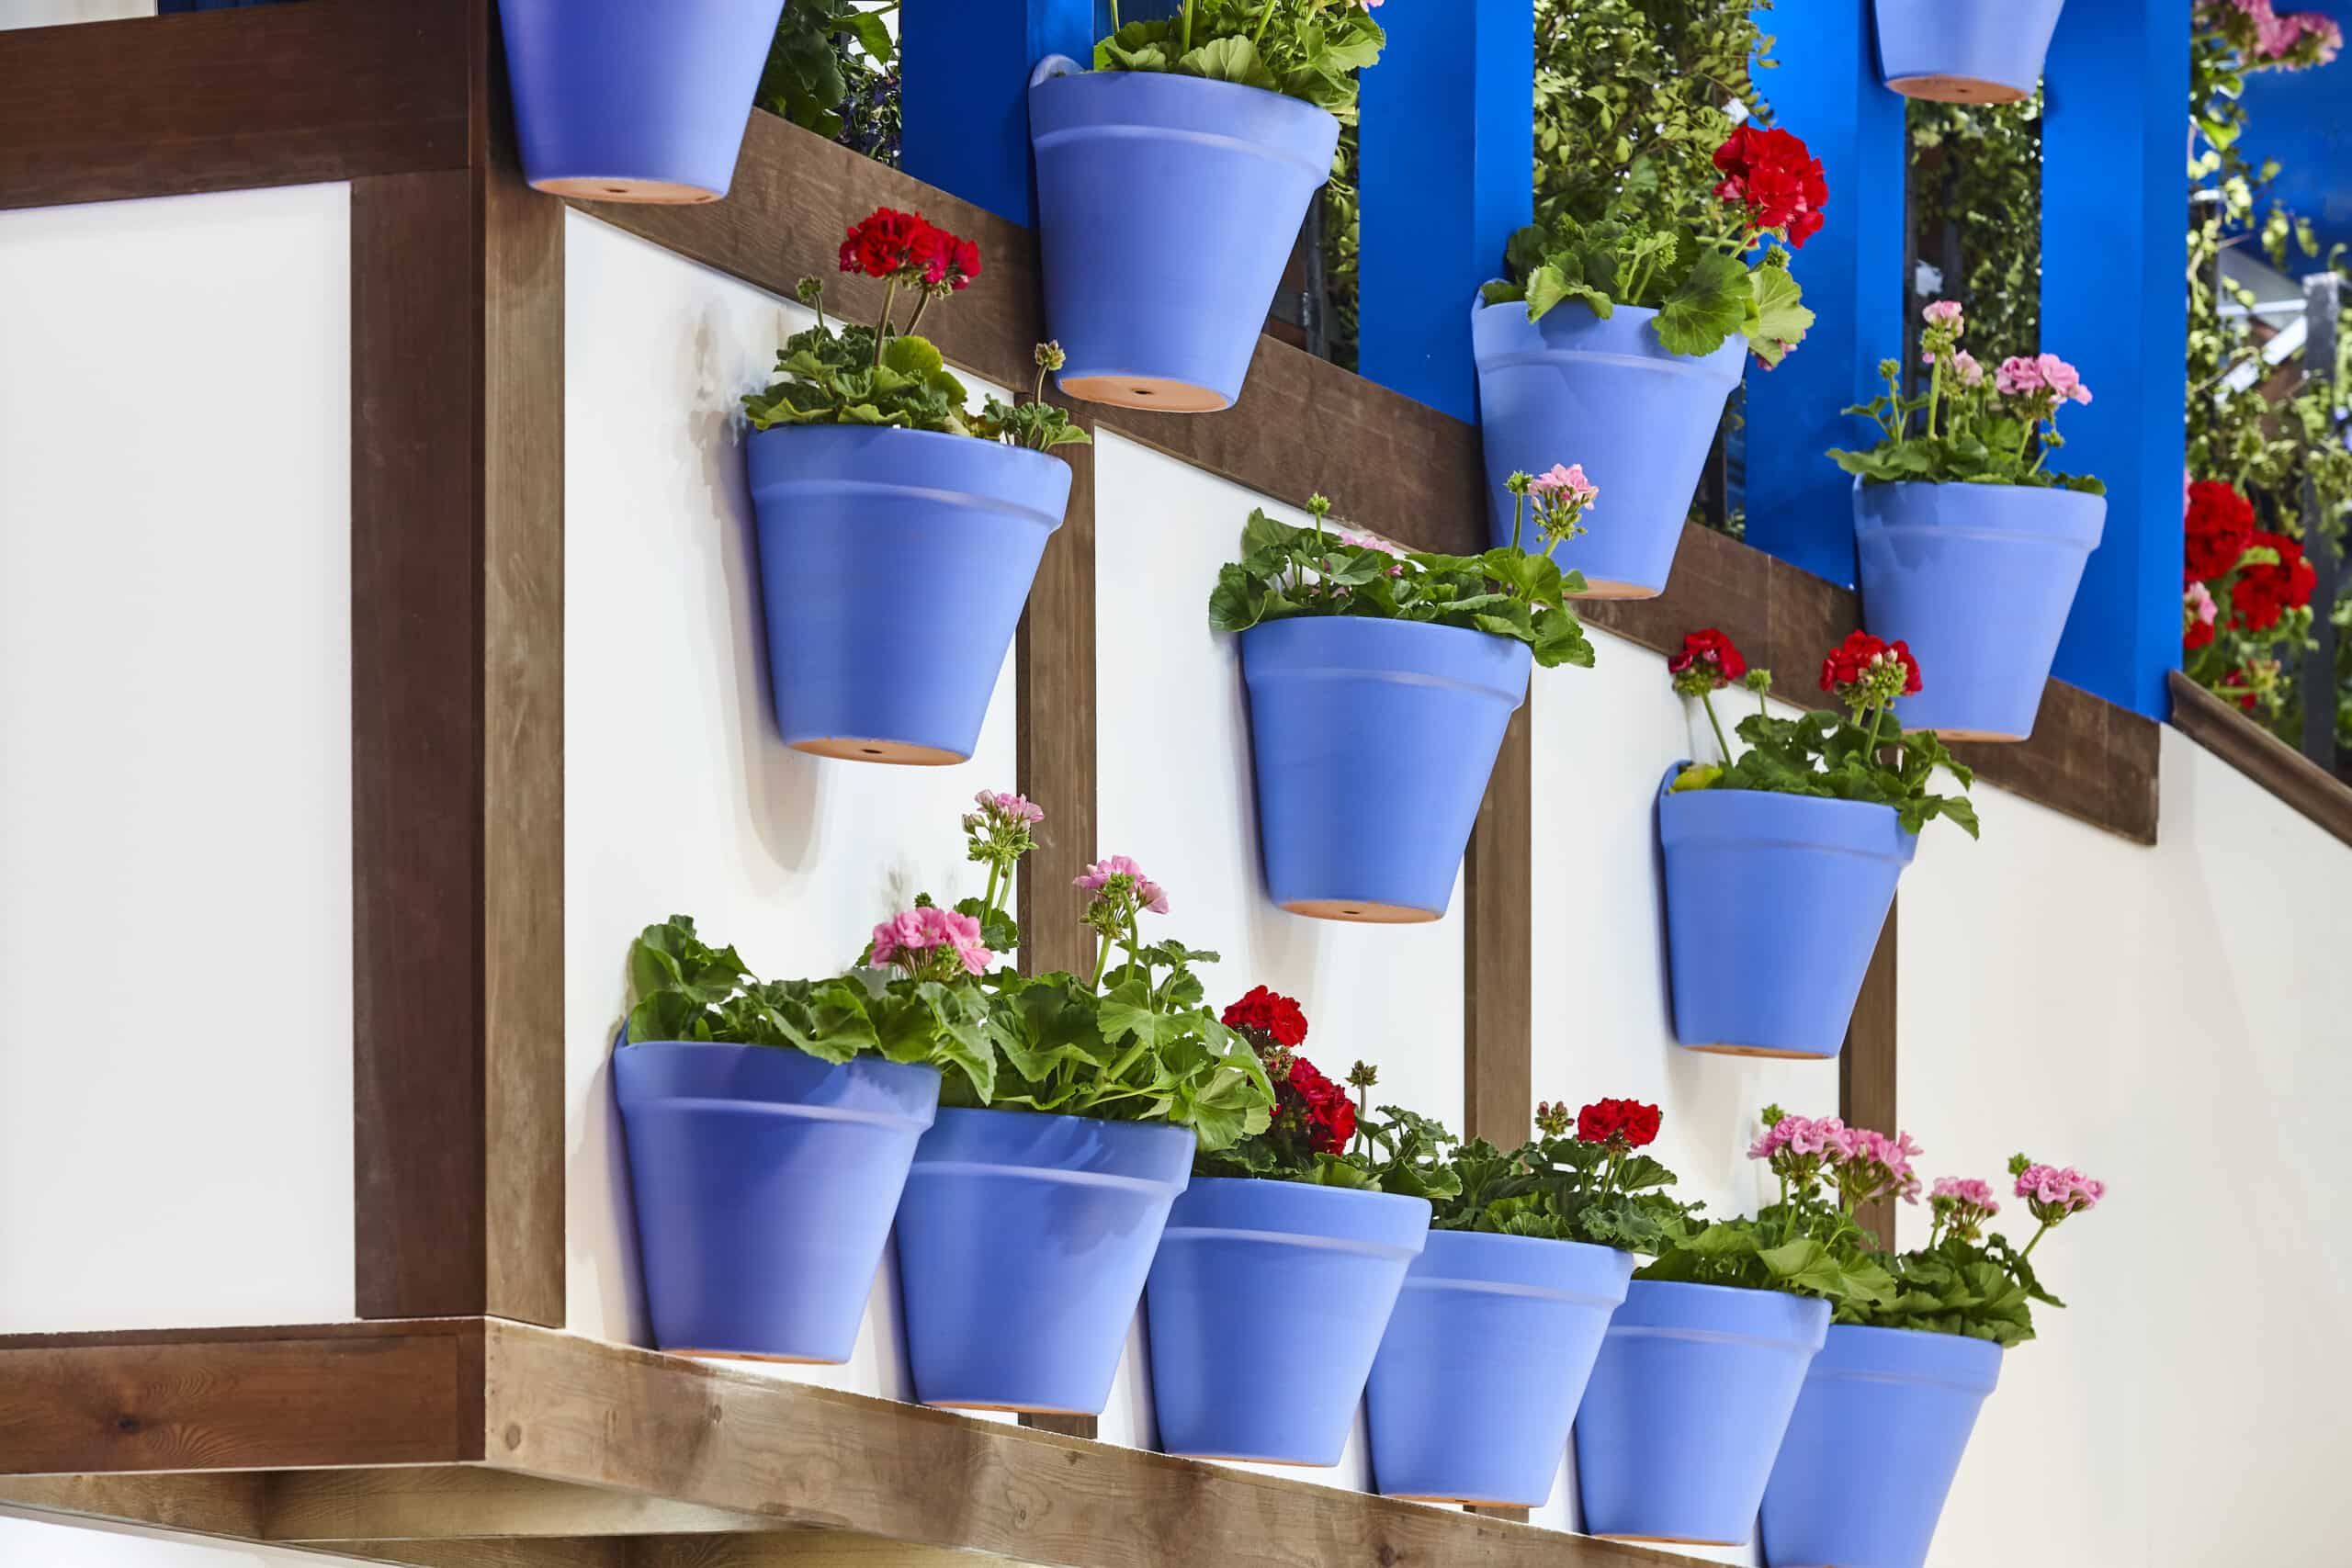 traditional balcony detail with flower pots in blue tone. garden